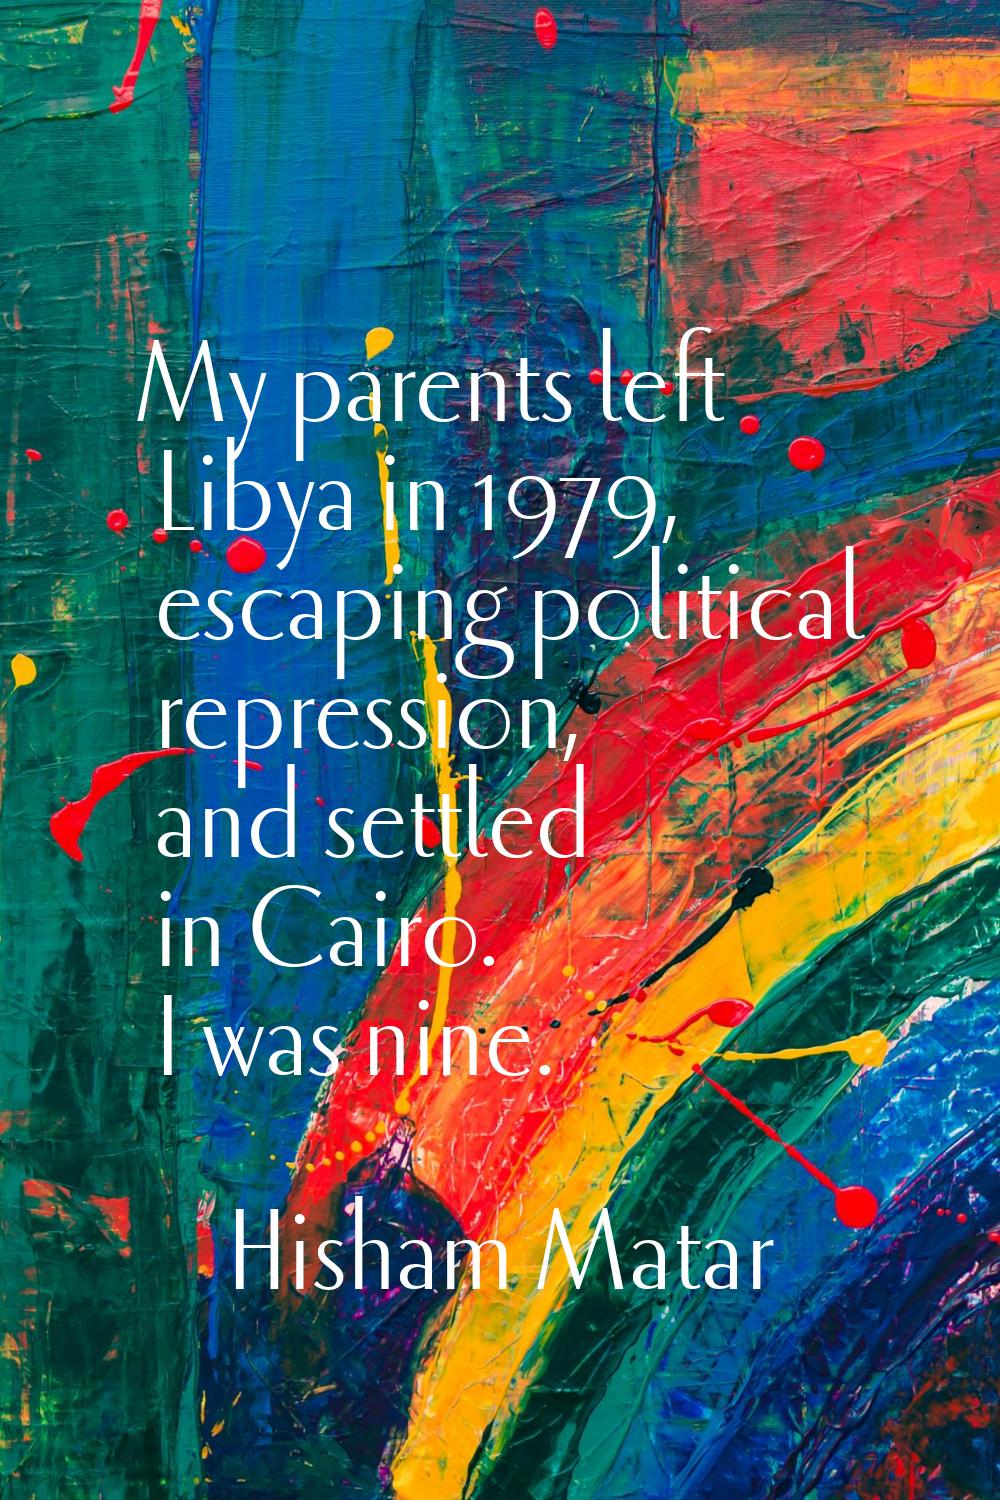 My parents left Libya in 1979, escaping political repression, and settled in Cairo. I was nine.